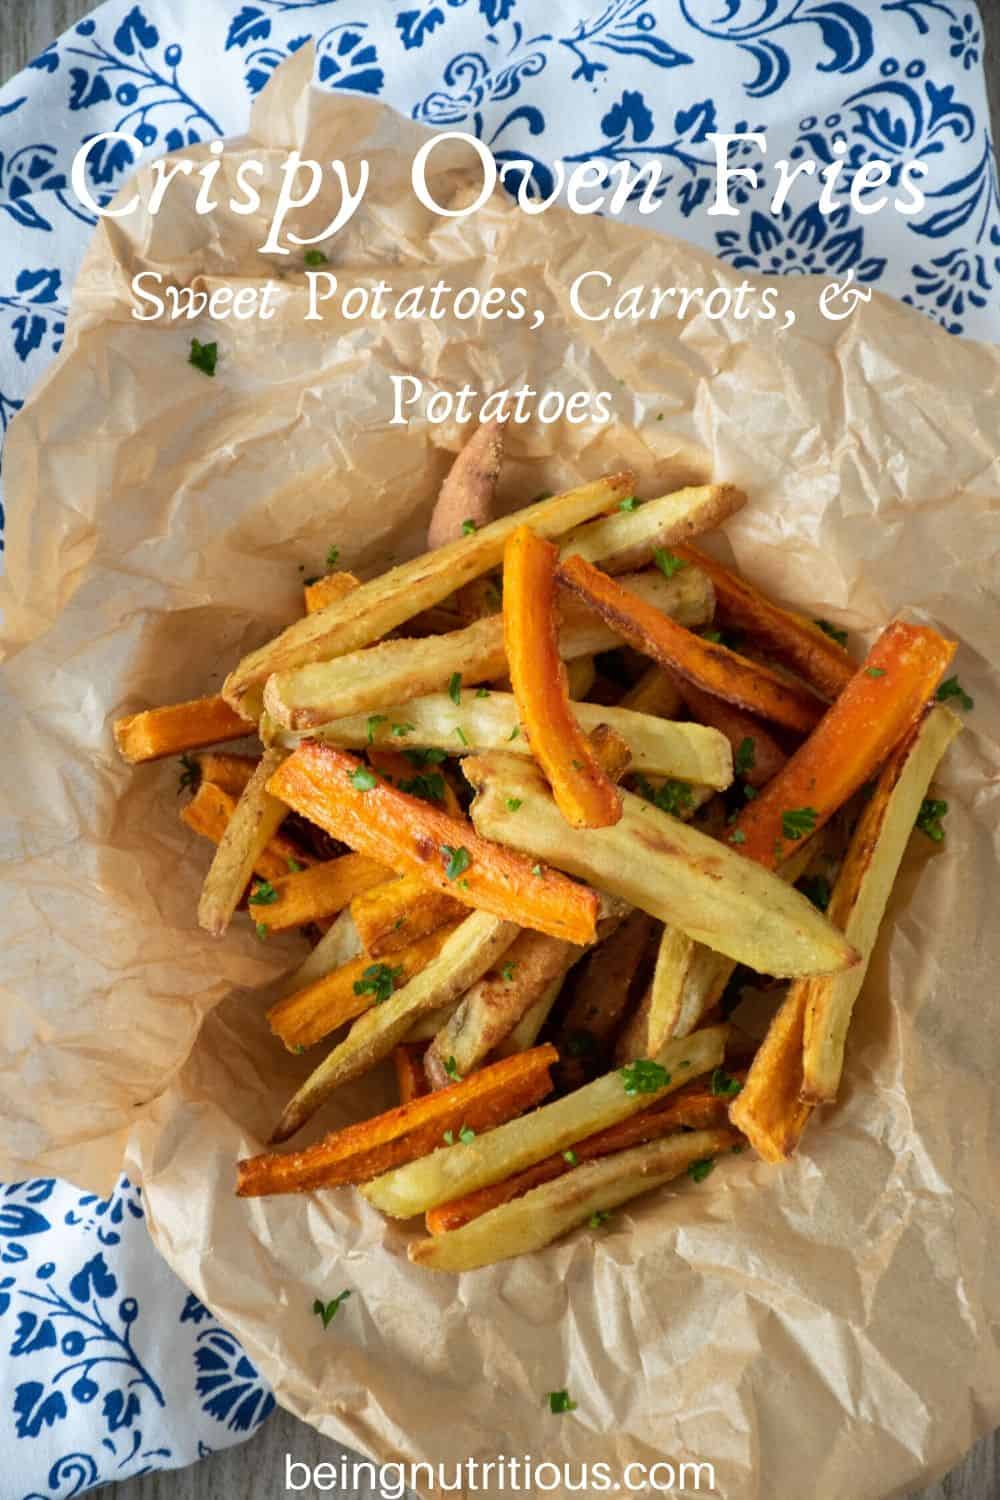 Overhead view of a basket of root vegetable fries. Text overlay: Crispy Oven Fries; sweet potatoes, carrots, and potatoes.